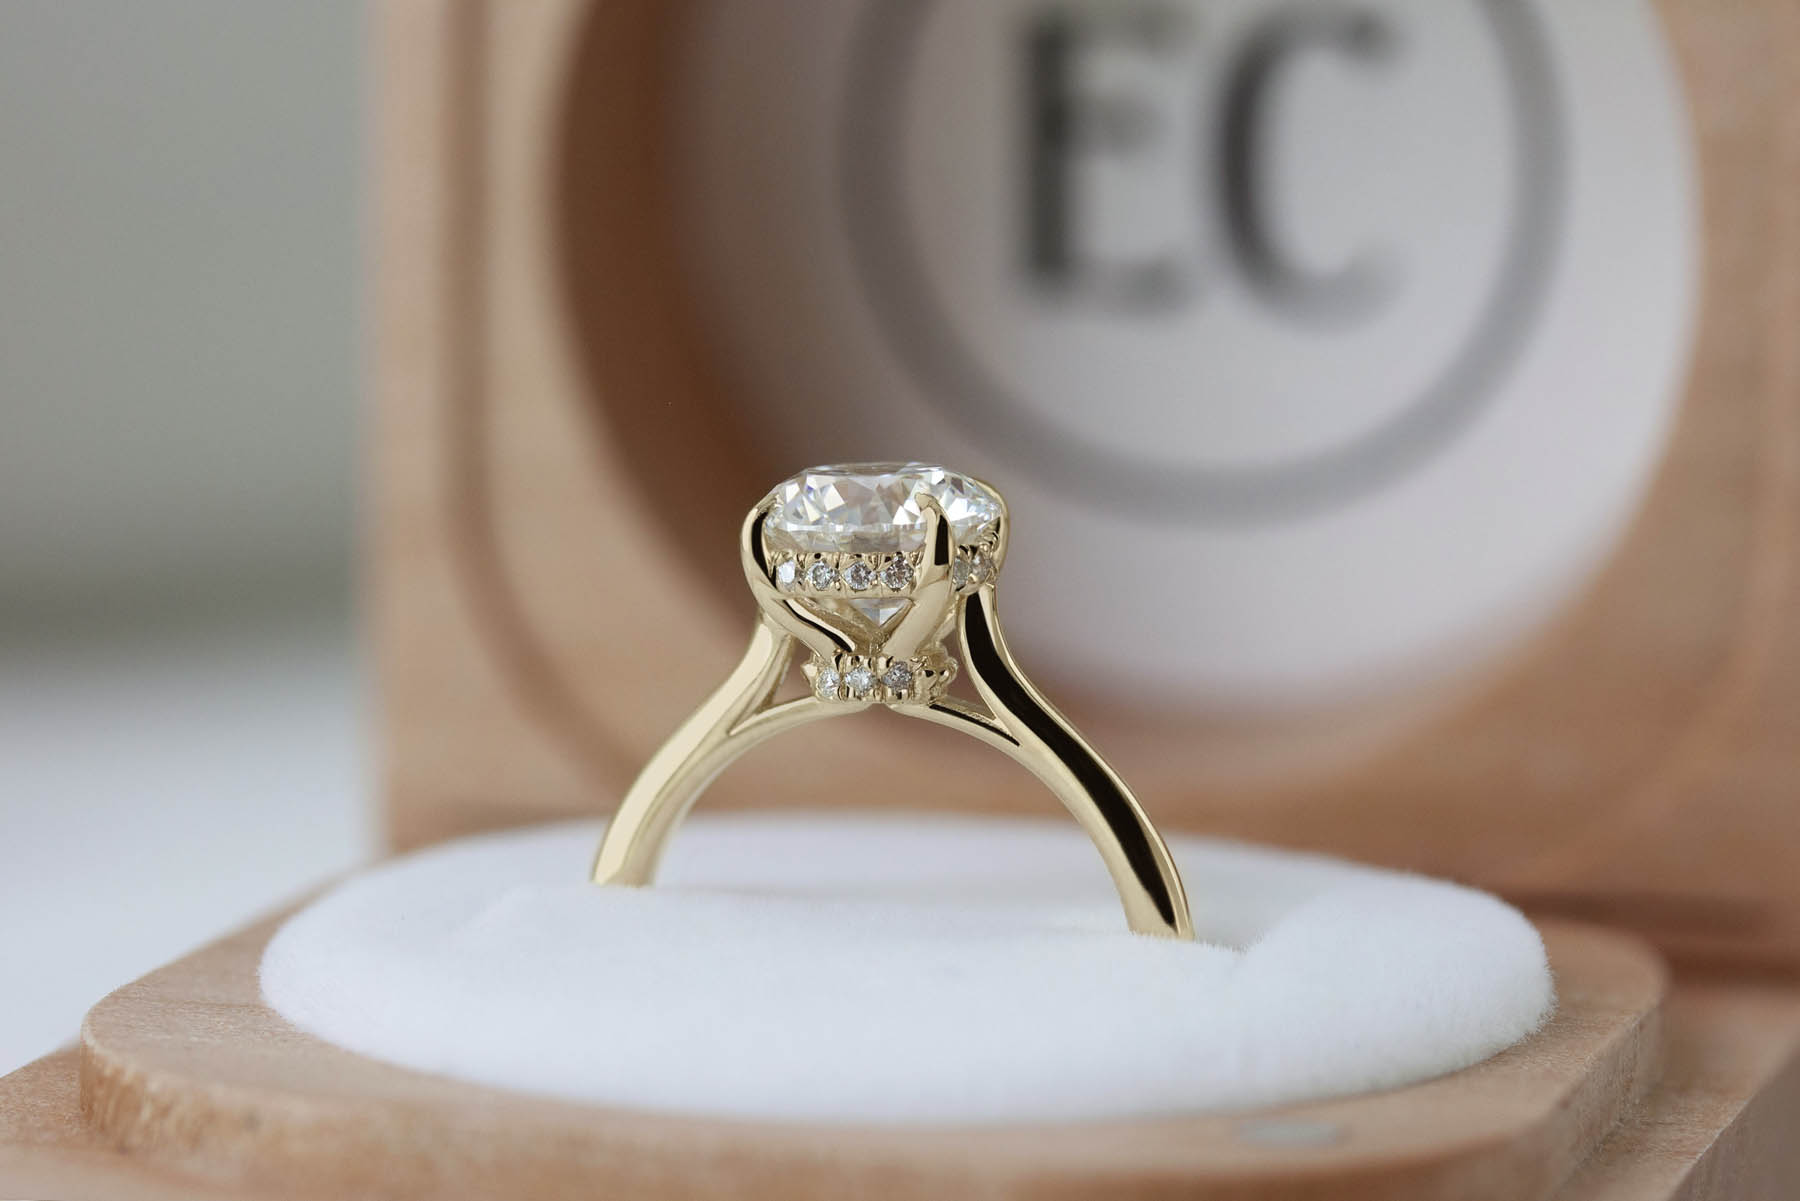 A close-up sideways shot of a gold band ring with a hidden halo and clear gem, siting up in a jewelry box.